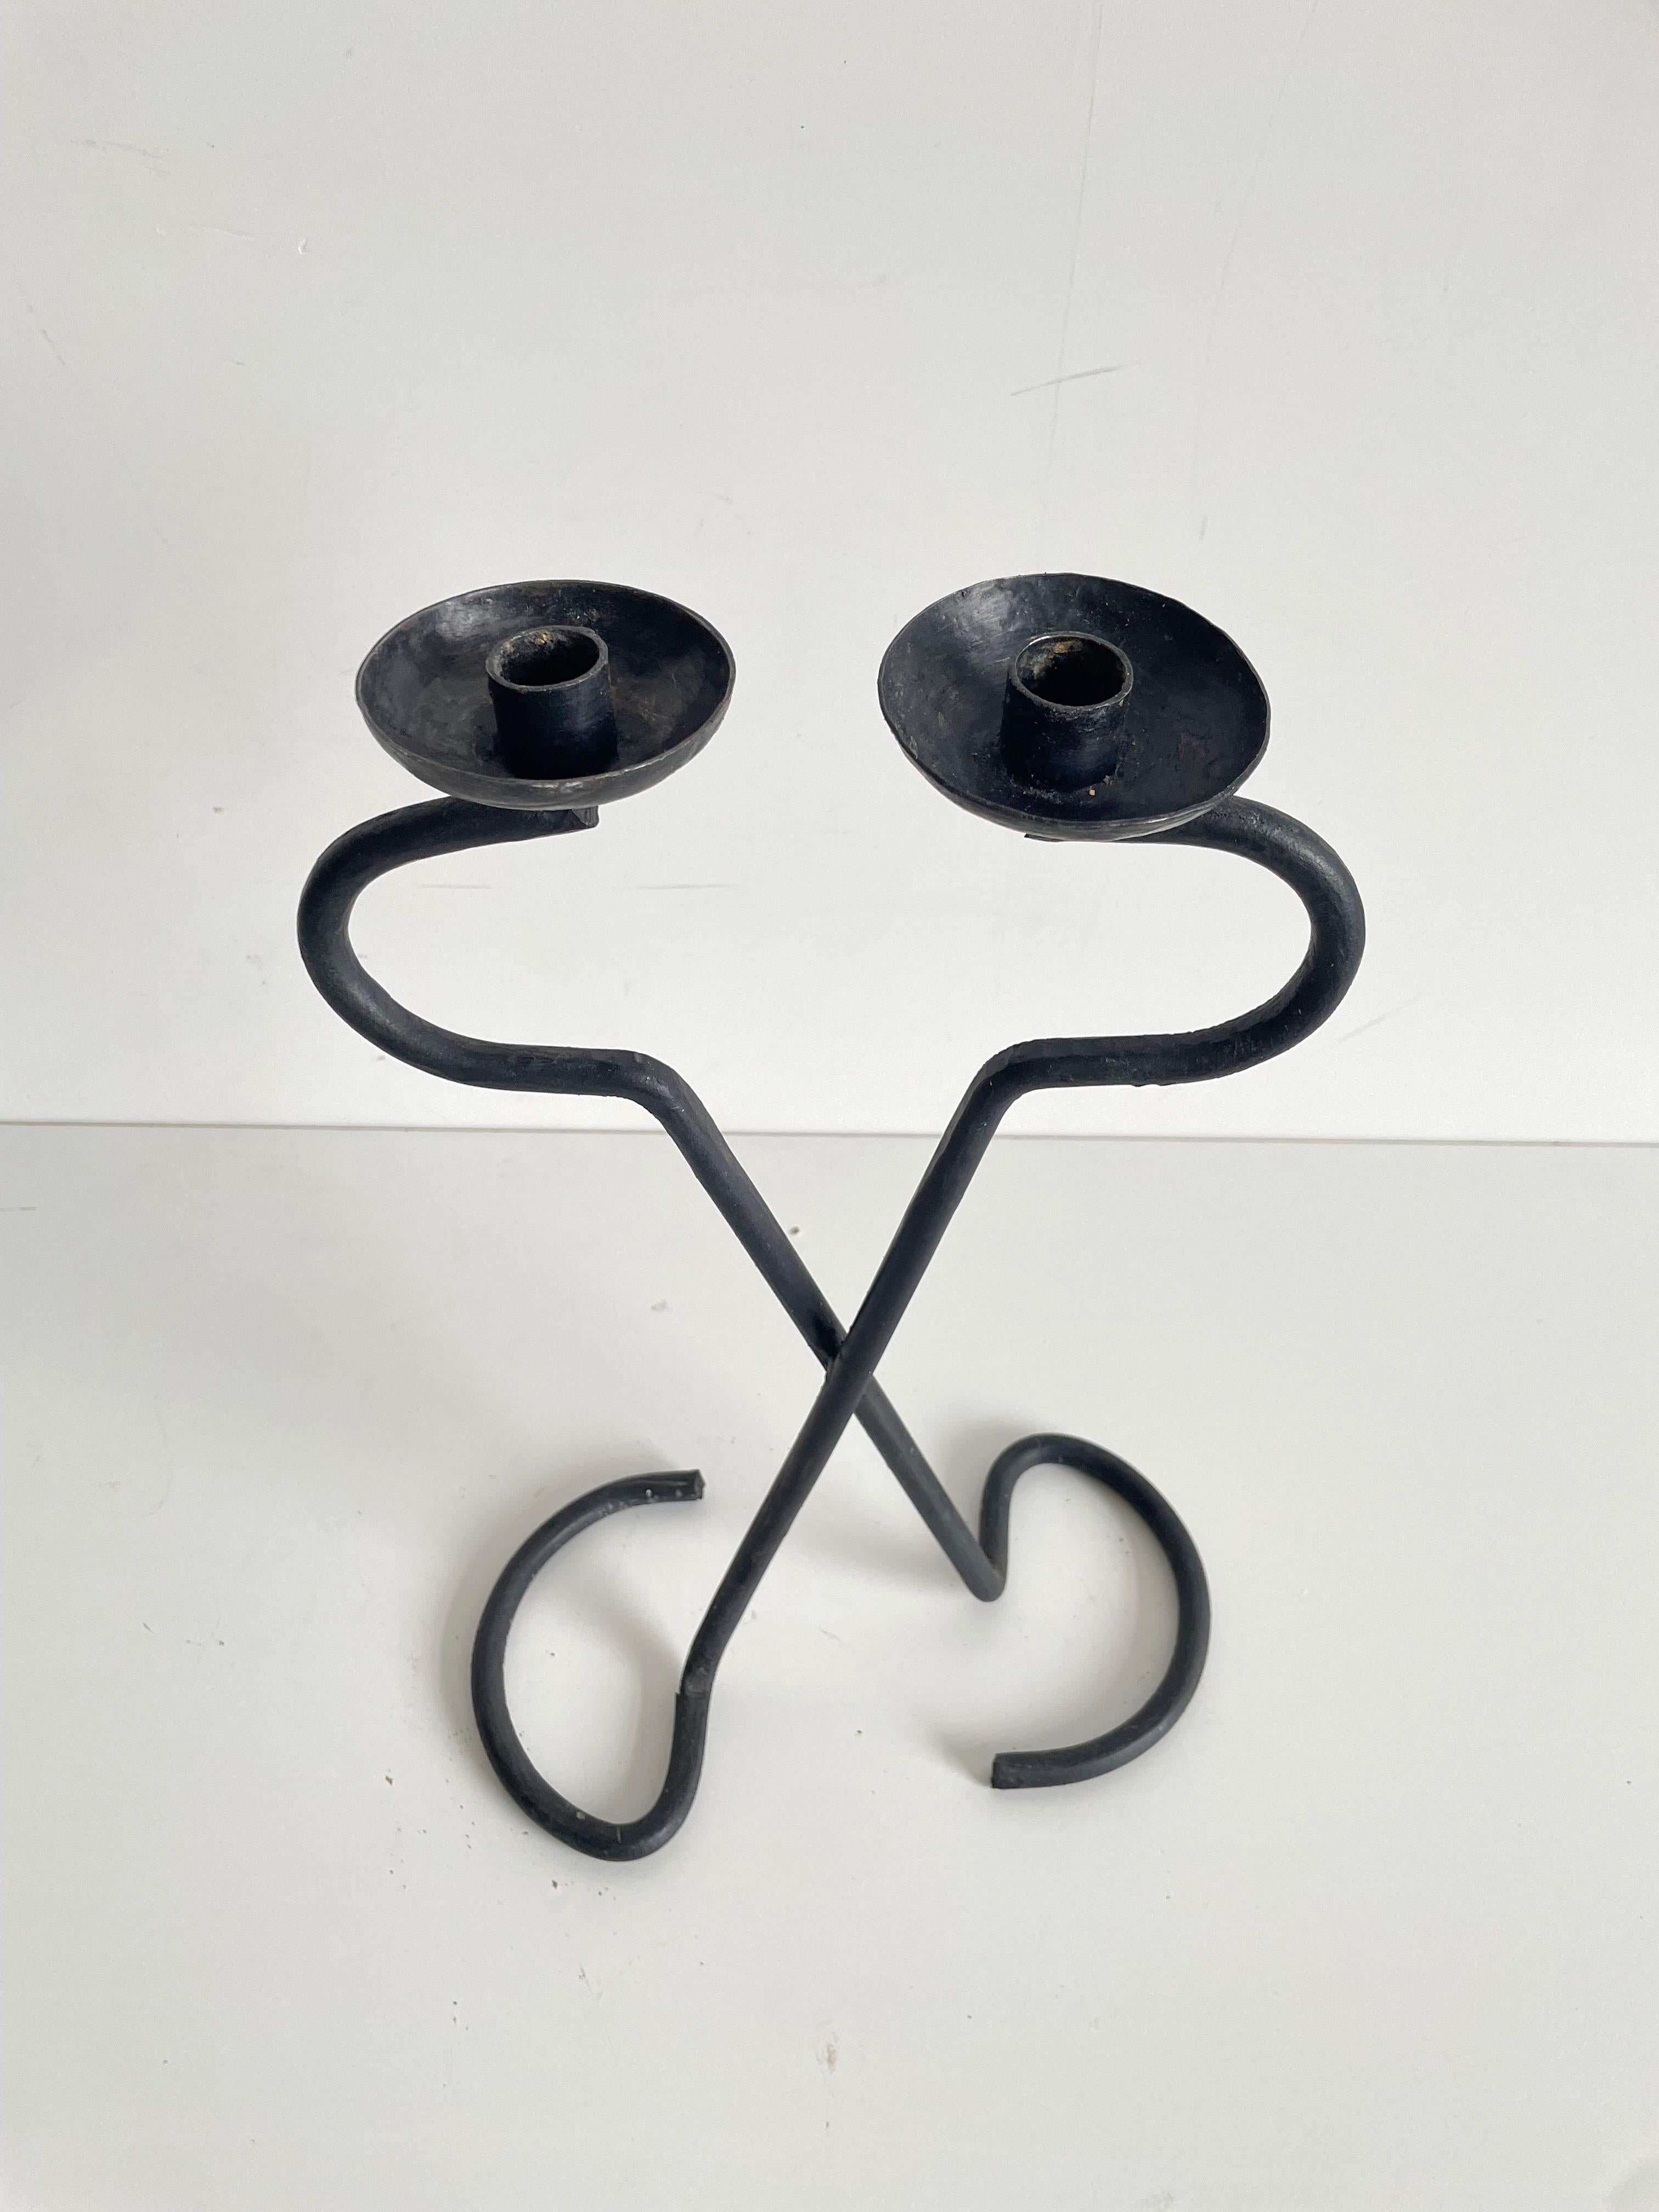 Sculptural brutalist wrought iron candle holder with two arms, each holding a circular plate measuring 8 cm in diameter with the candlestick holder in the center. Inner diameter of the candlestick holder is 2 cm

The candle holder was handcrafted